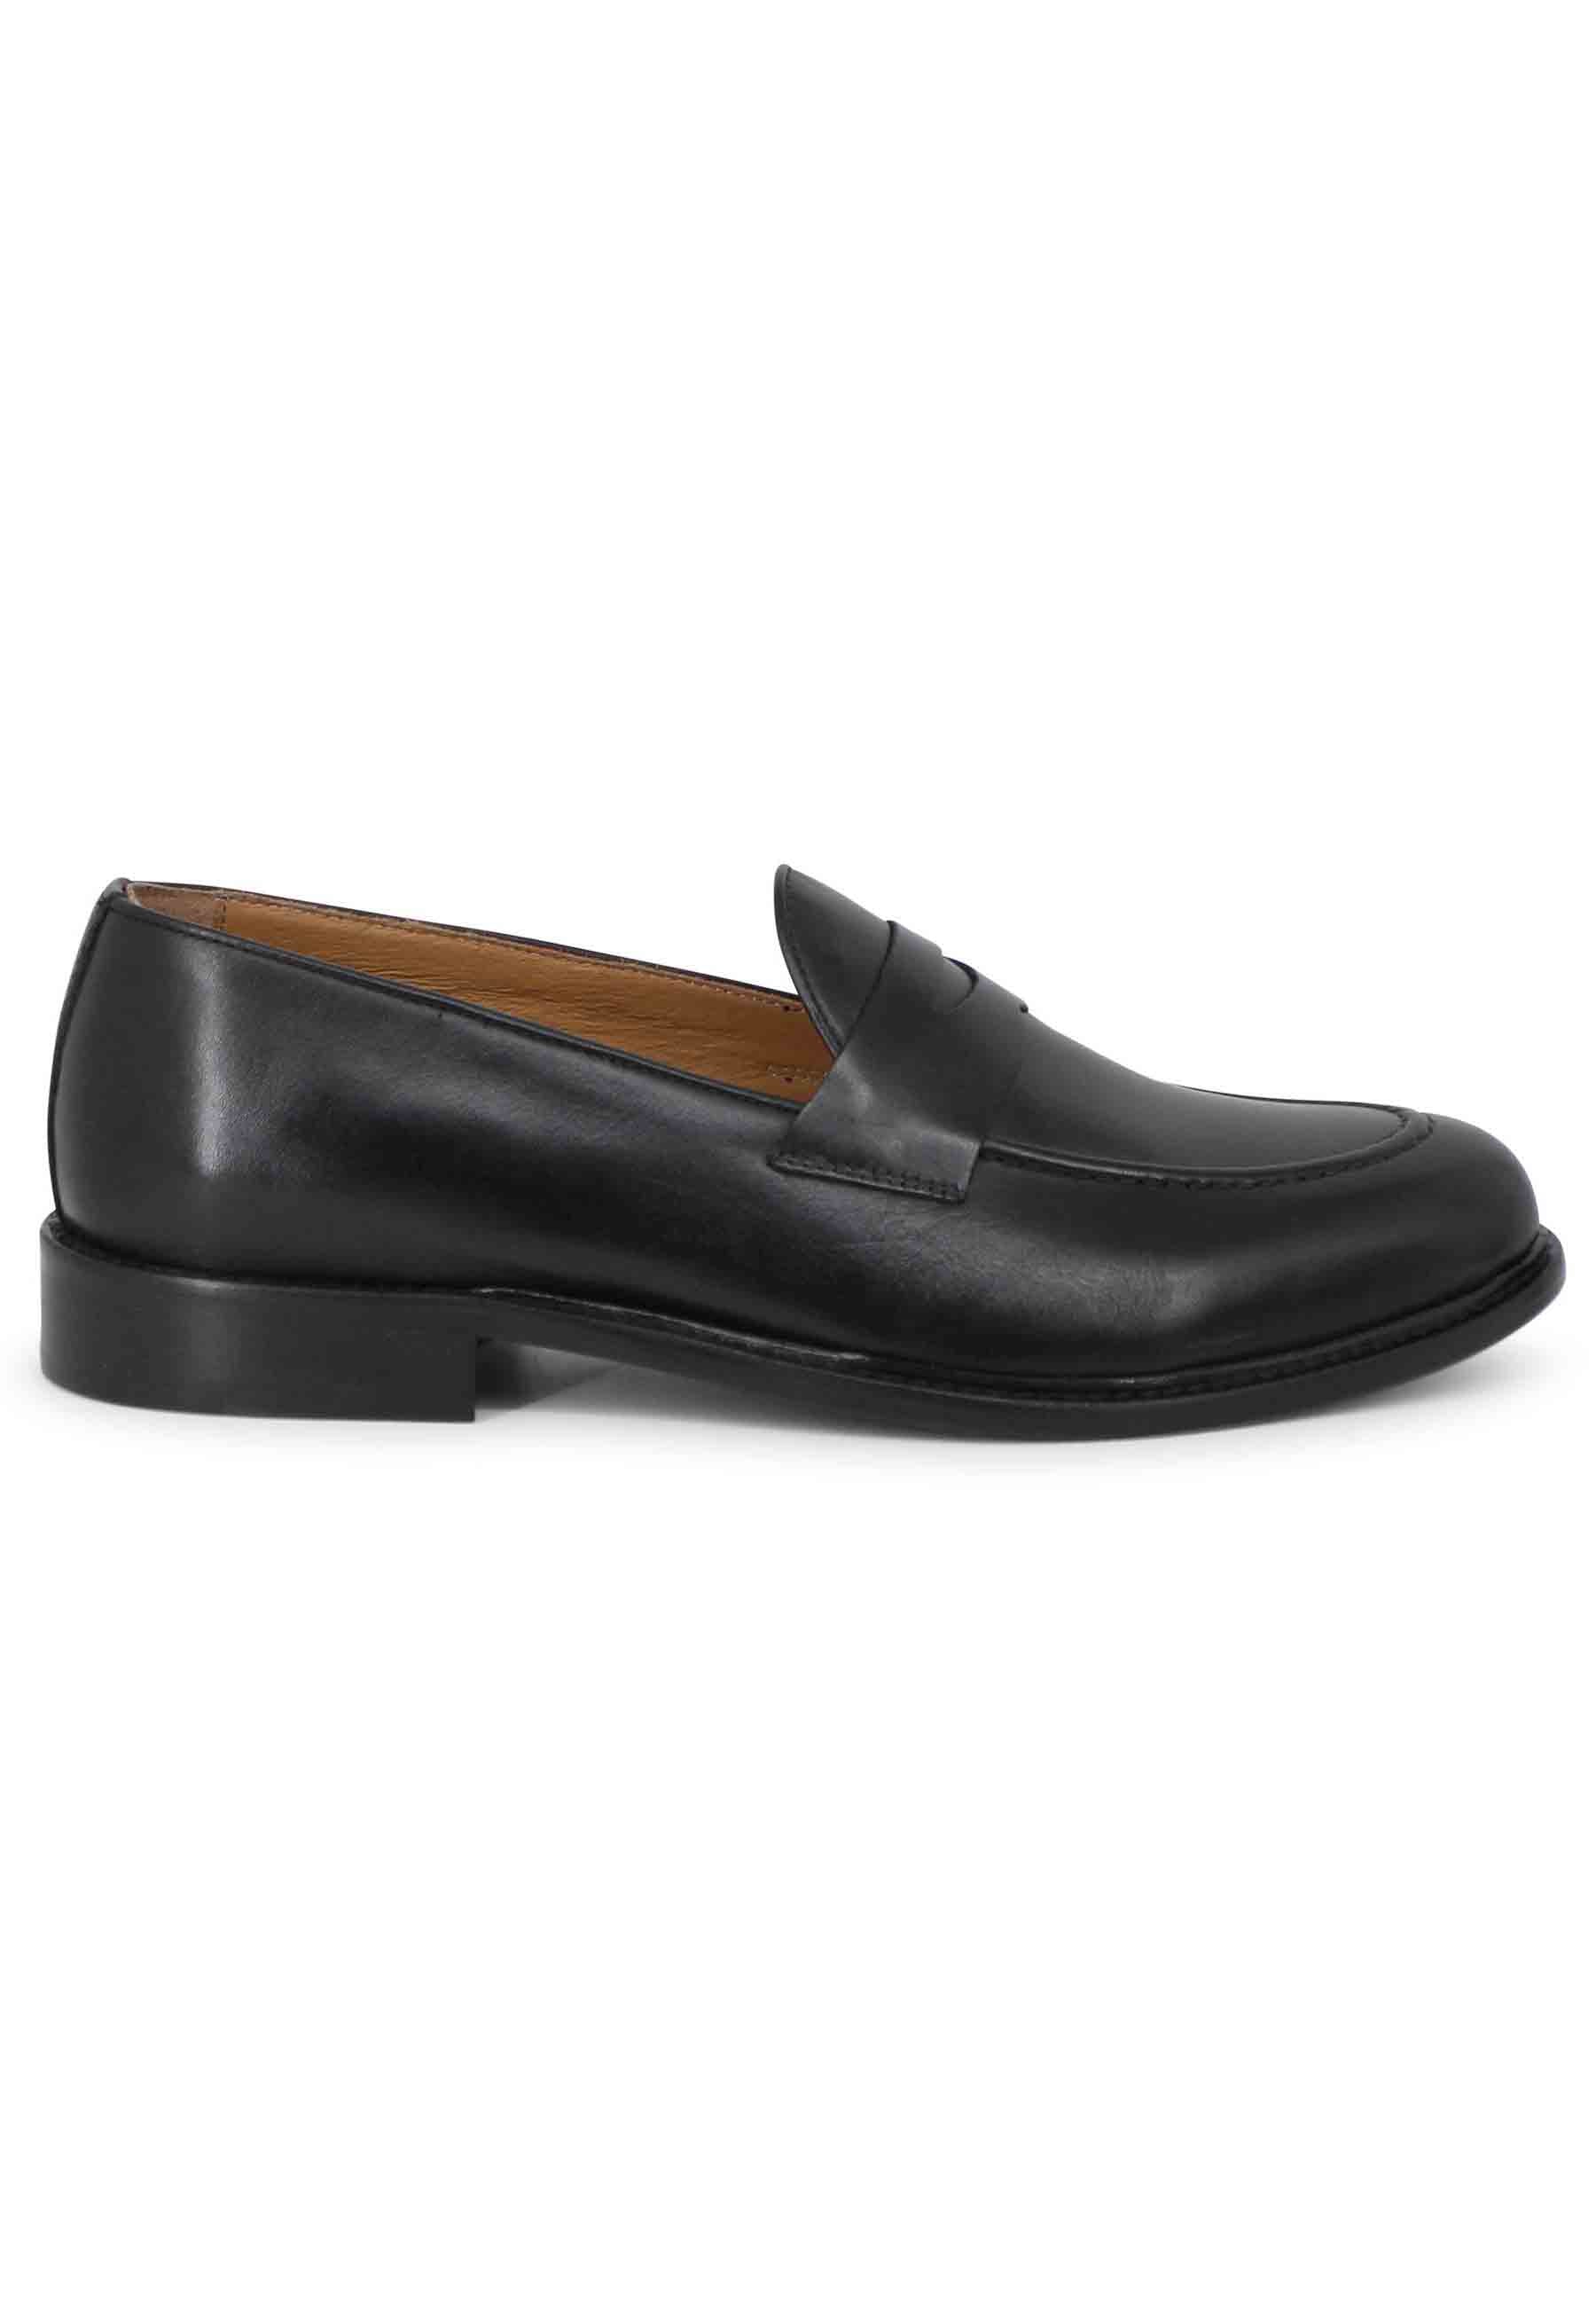 Men's black leather loafers with leather sole